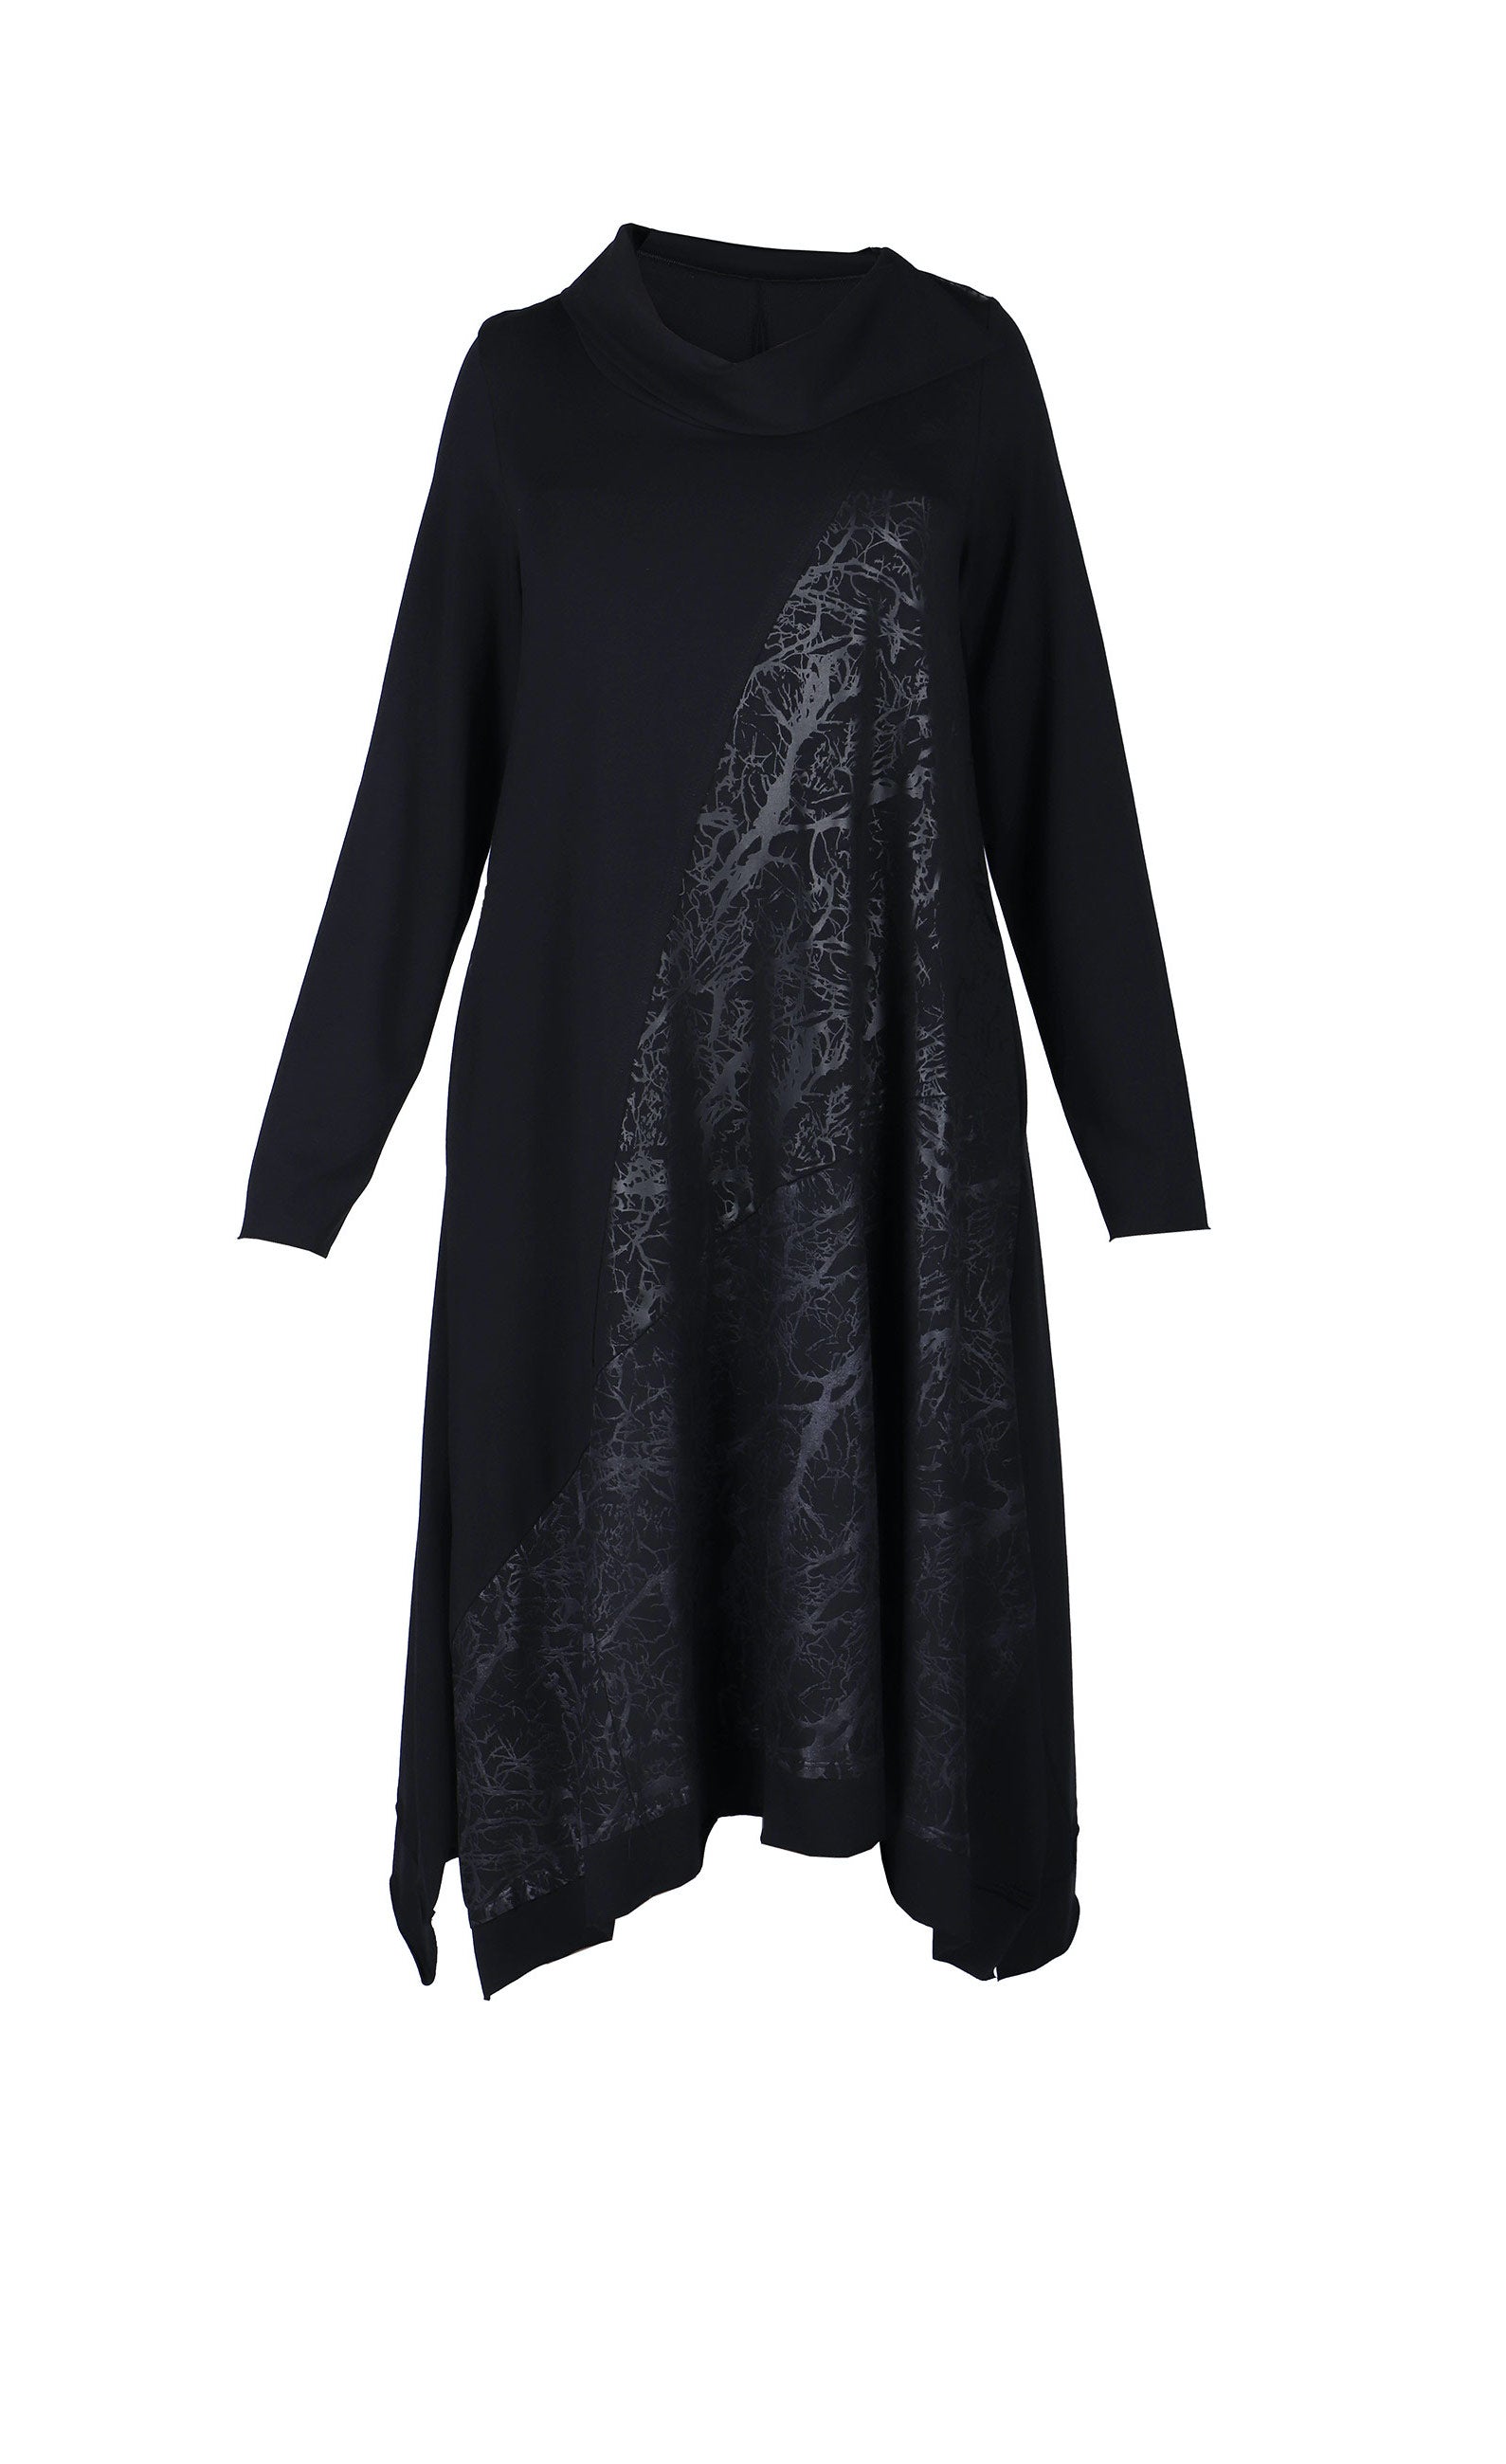 Front view of the luukaa Black Branch Dress. This dress has long sleeves, a cowl neck, an a-line silhouette, and a front glossy branch-like print running diagonally across the body.